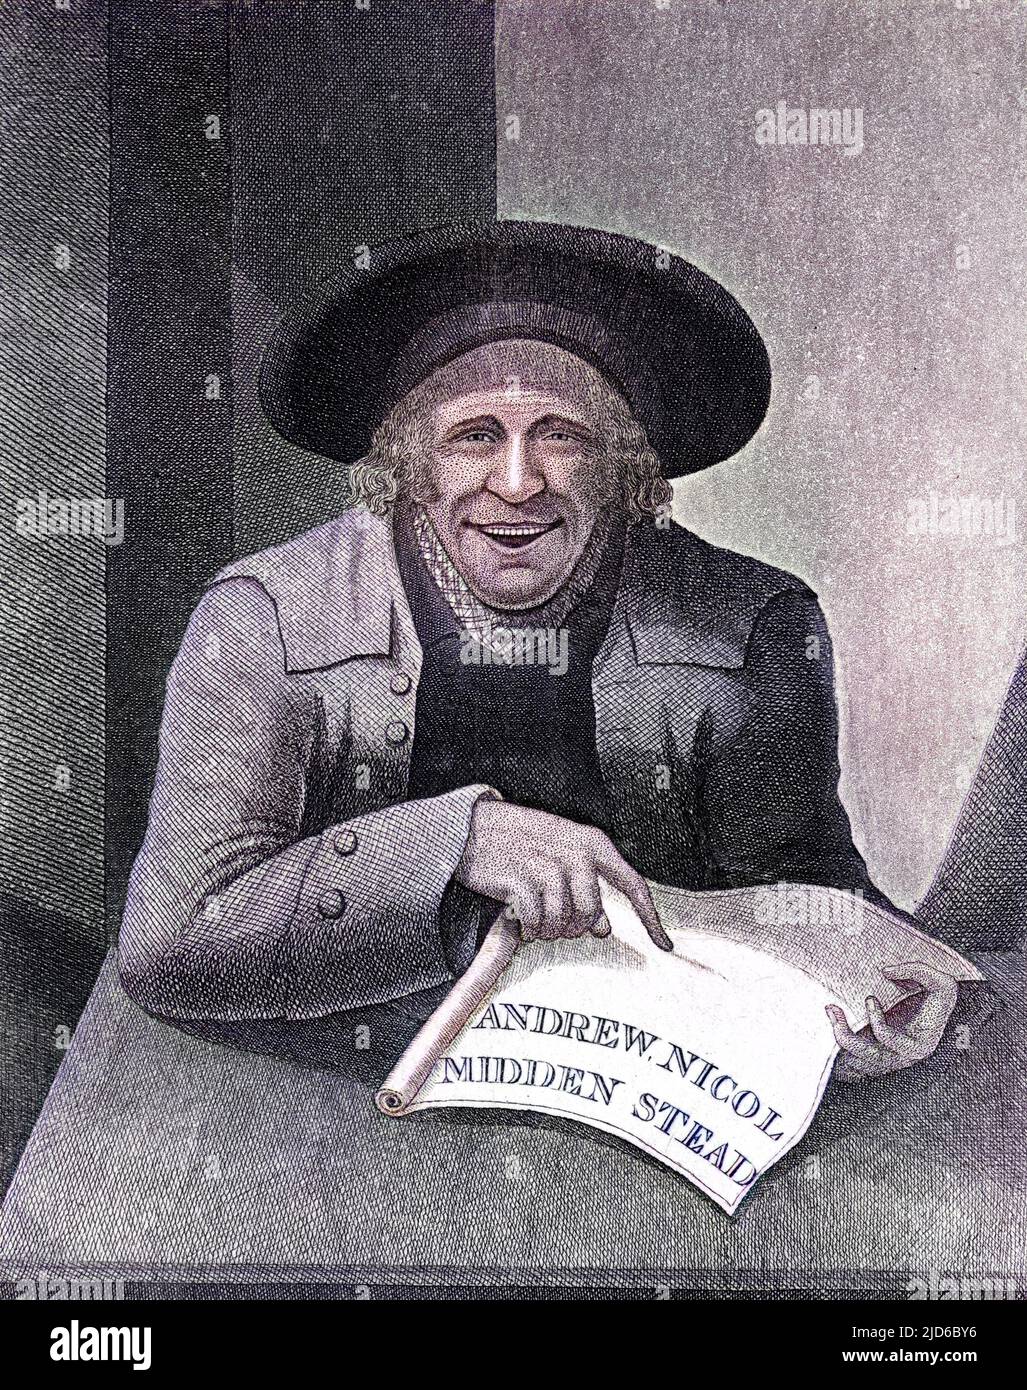 ANDREW NICOL A noted Edinburgh character, a businessman notorious for his involvement in law-suits. Colourised version of : 10167329       Date: ? - 1817 Stock Photo